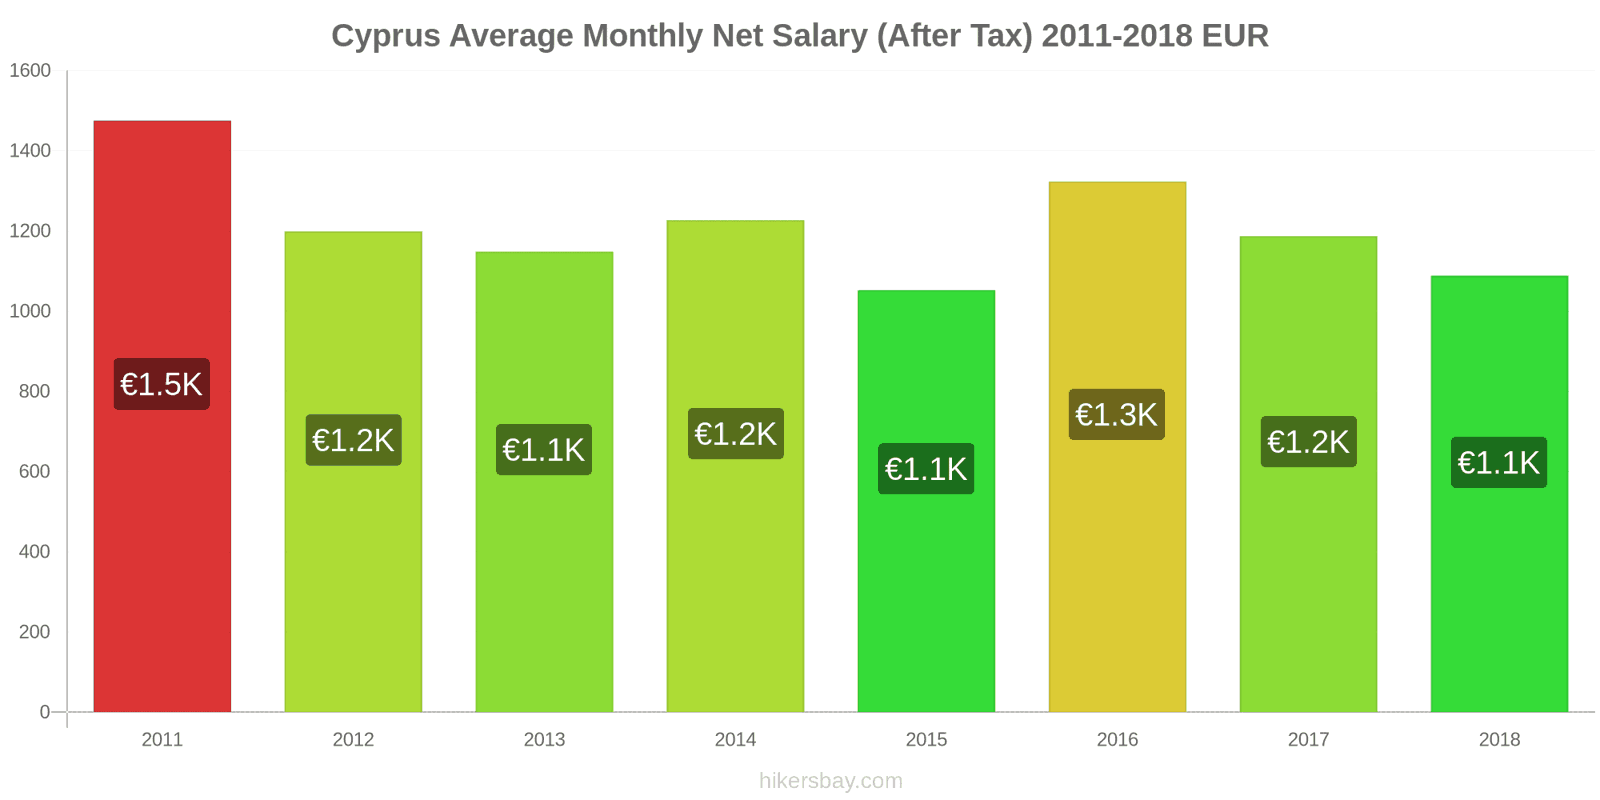 Cyprus price changes Average Monthly Net Salary (After Tax) hikersbay.com